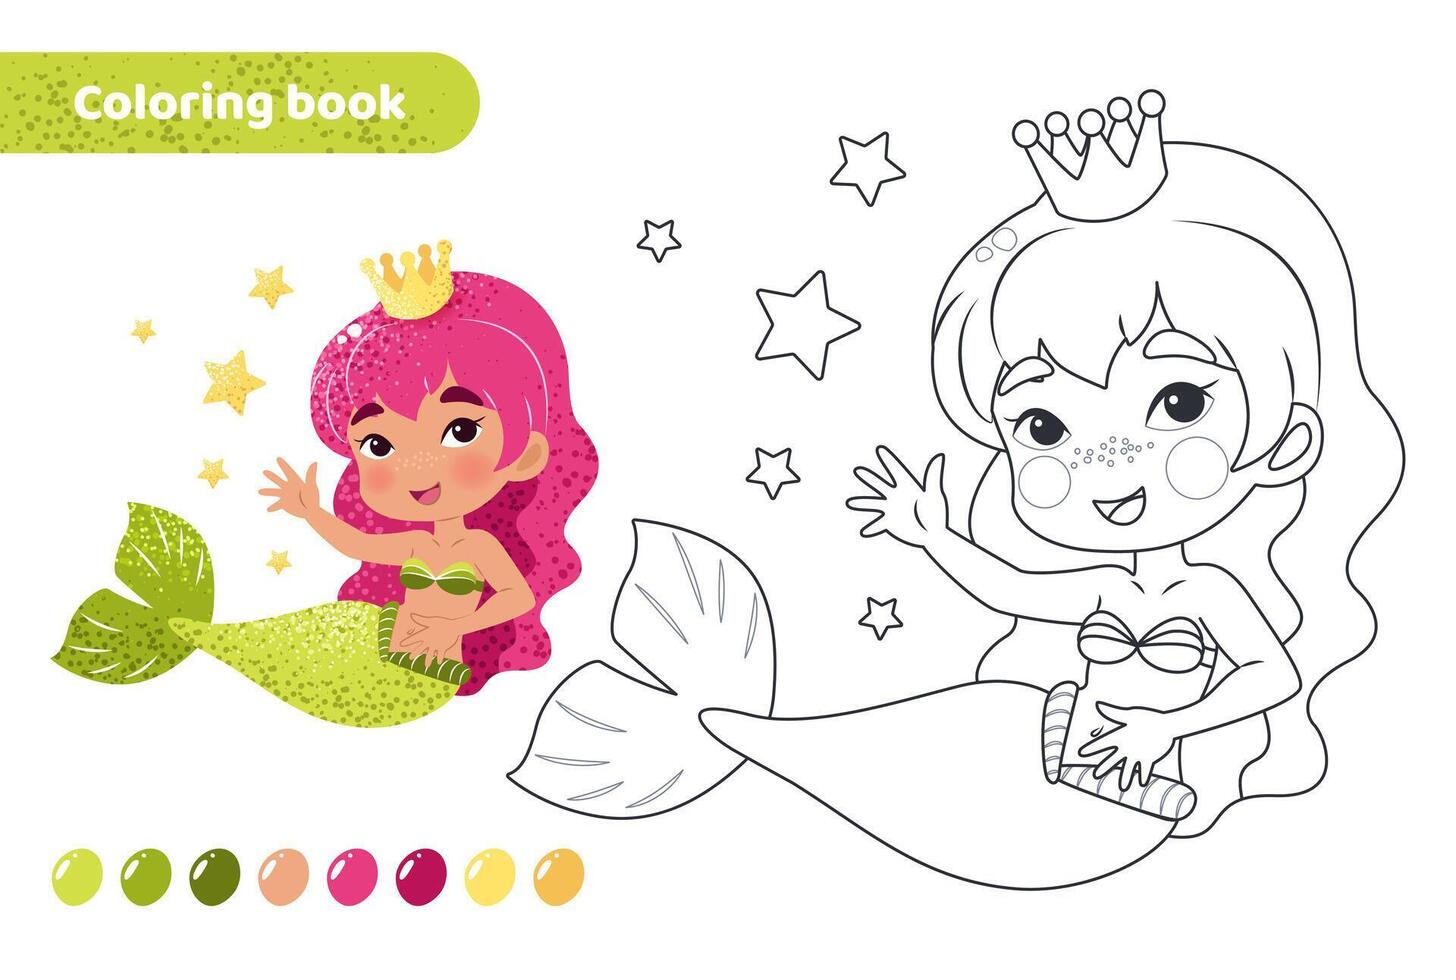 Coloring book for kids. Worksheet for drawing with cartoon mermaid. Cute magical creature. Coloring page with color palette for children. Vector illustration.